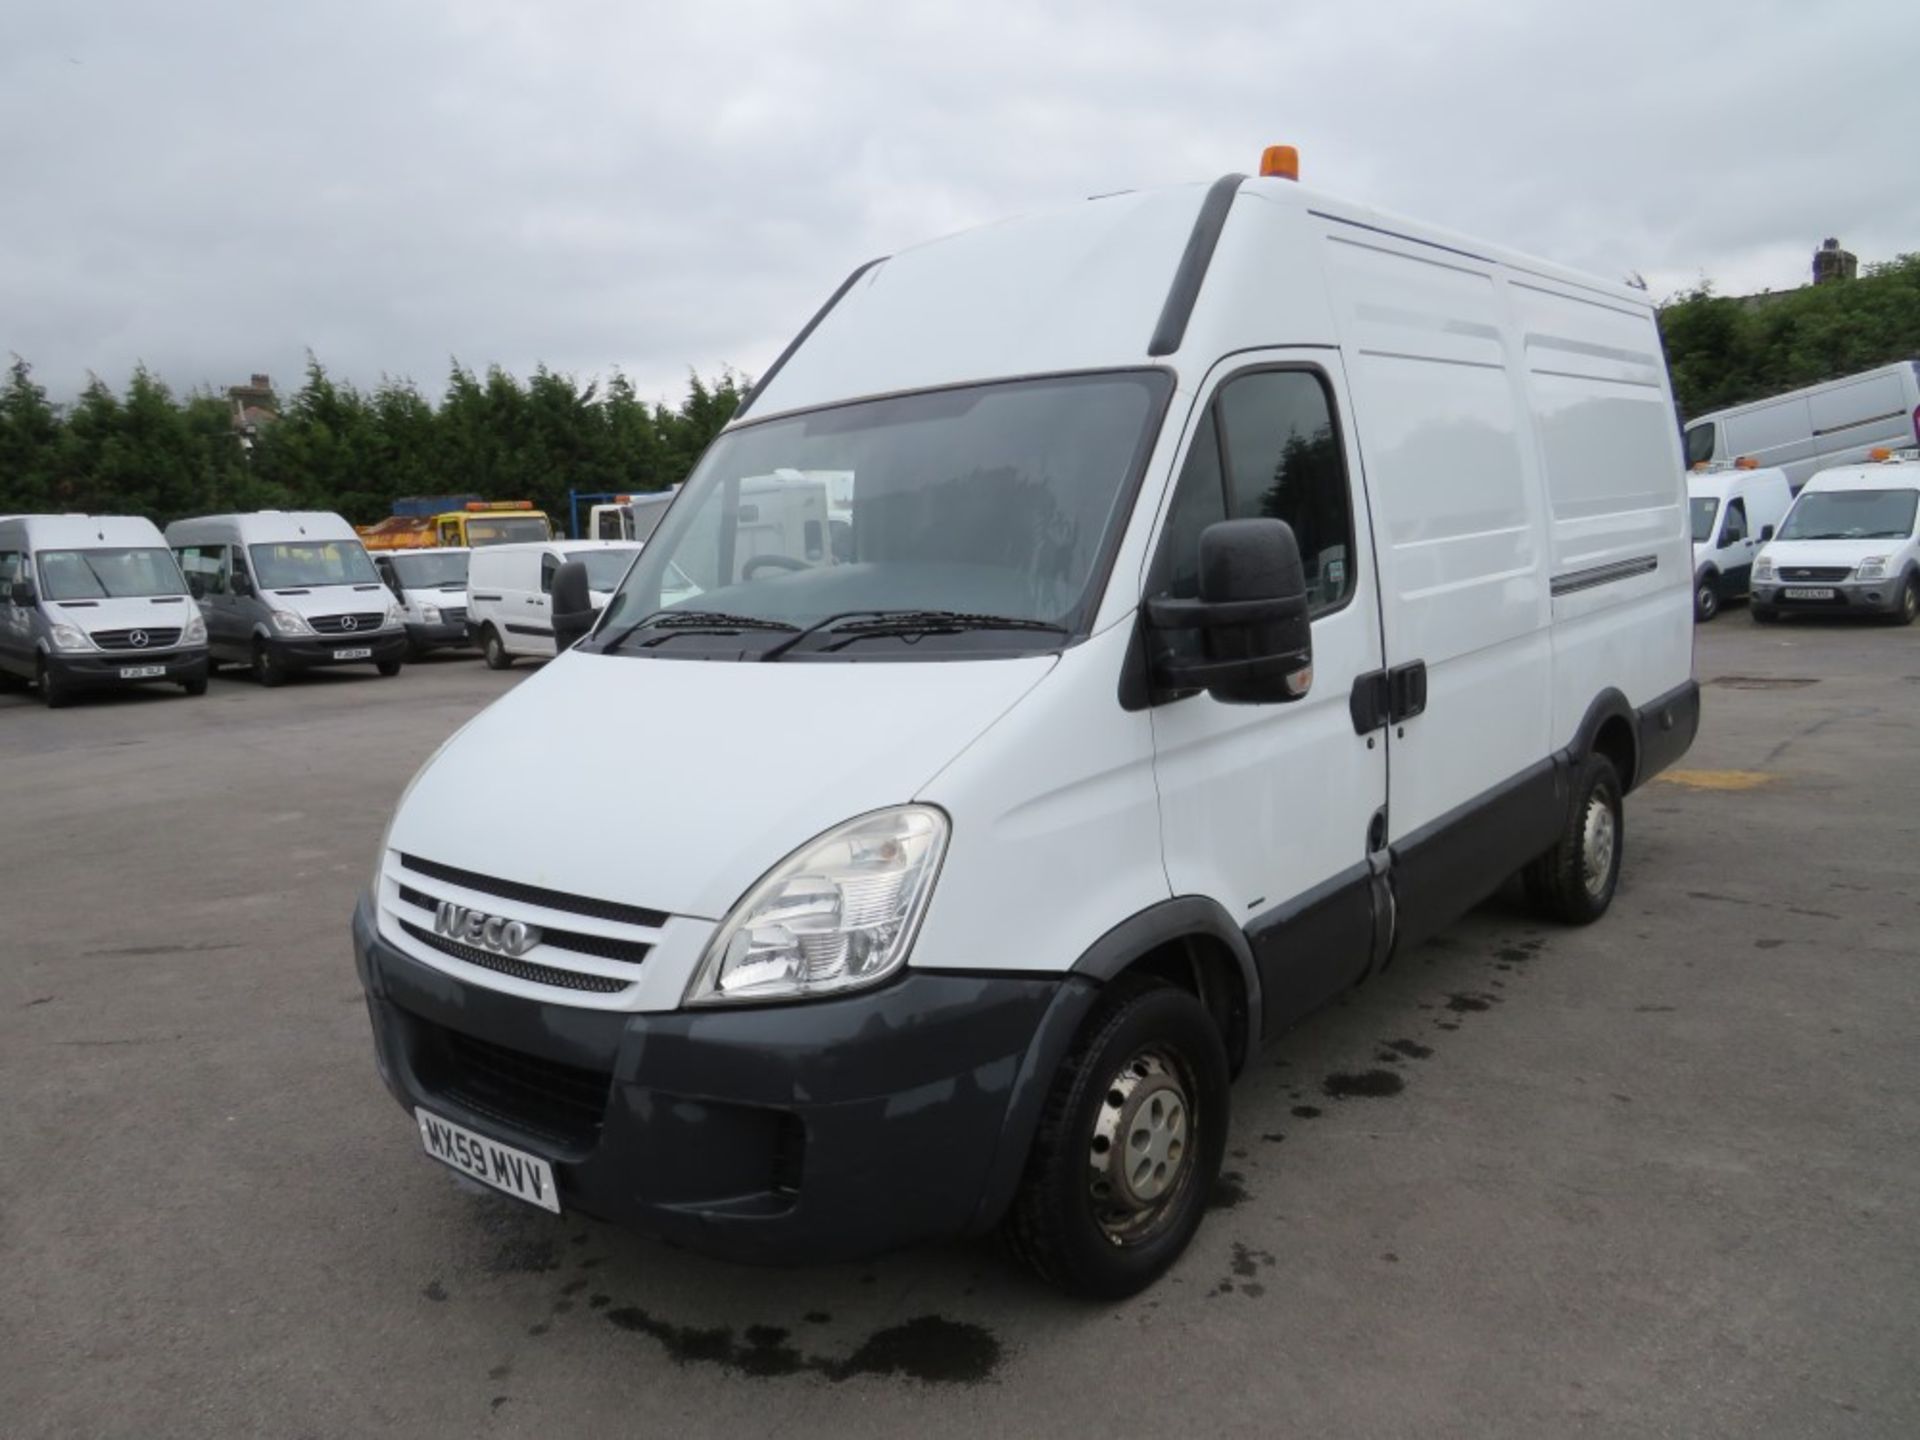 59 reg IVECO DAILY 35S12 MWB (DIRECT COUNCIL) 1ST REG 12/09, TEST 12/20, 127179M, V5 HERE, 1 OWNER - Image 2 of 7